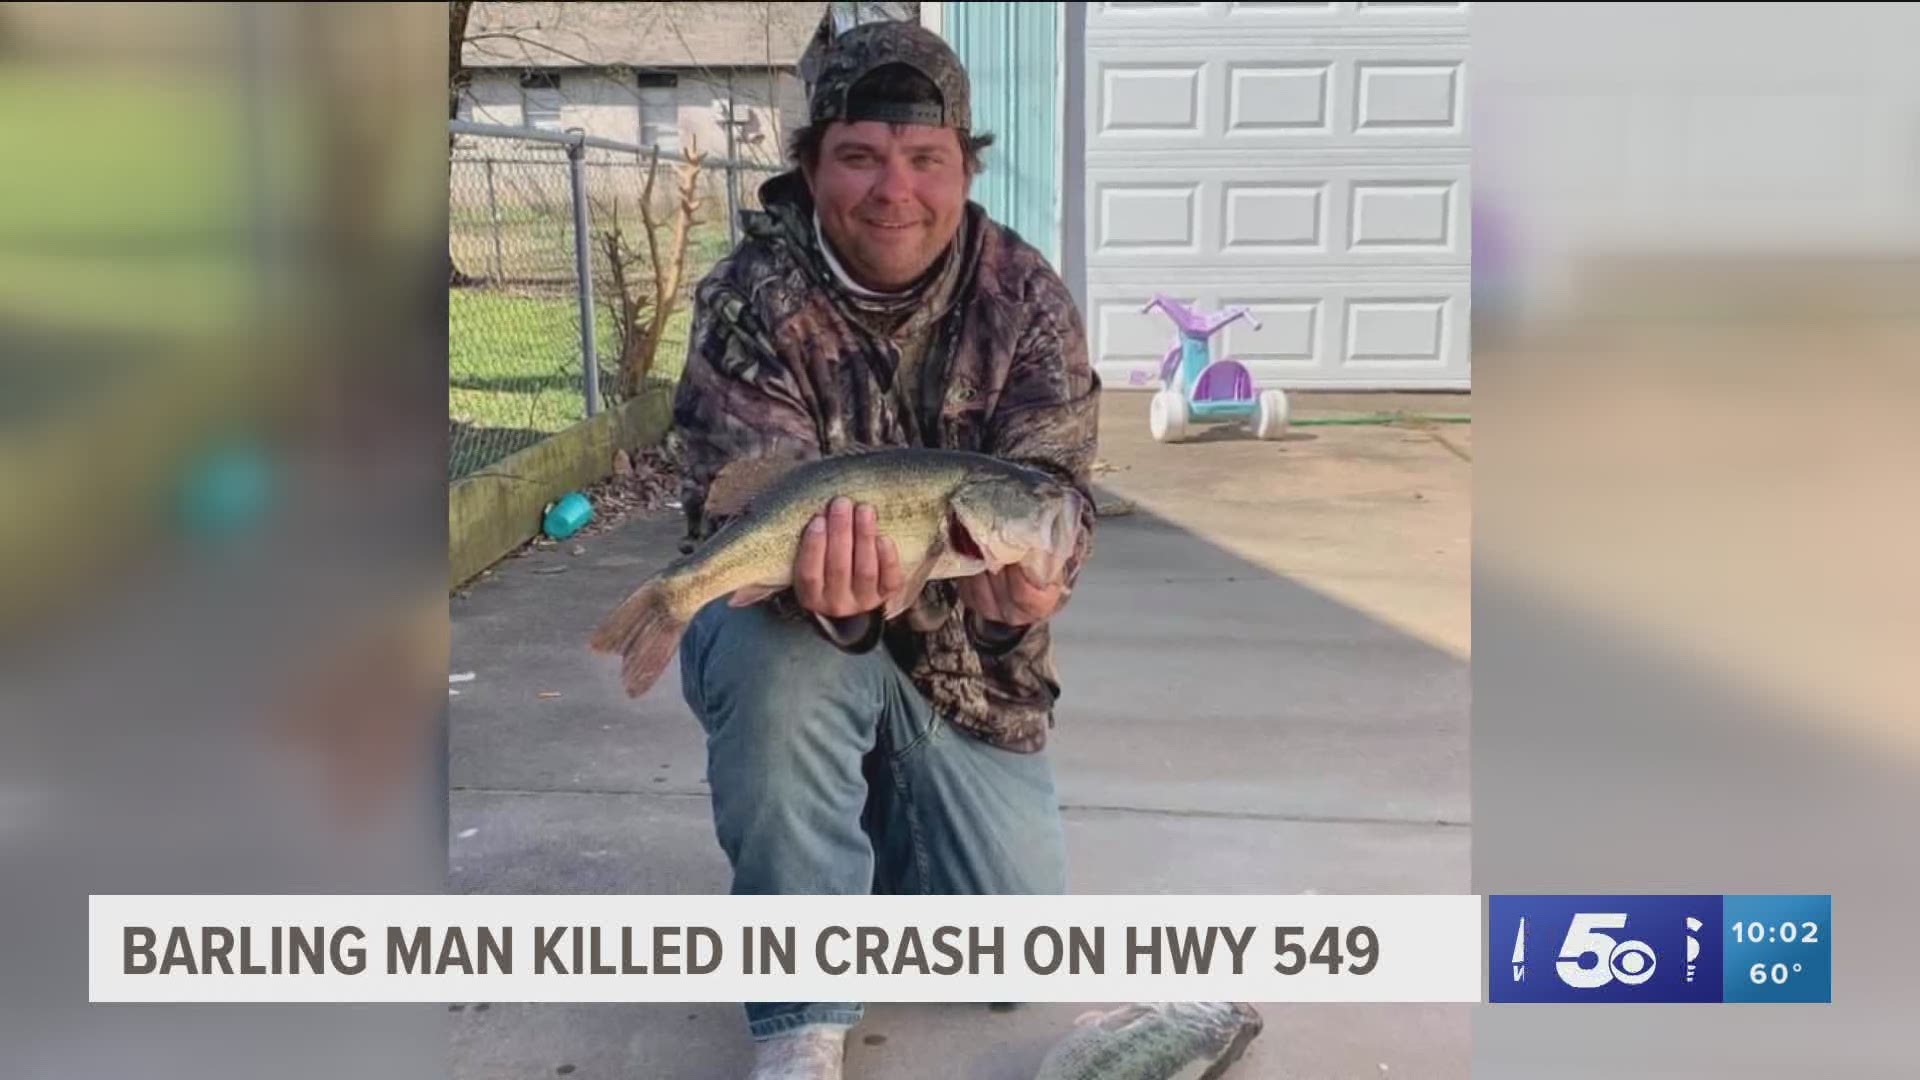 36-year-old Joseph Pearson of Barling was killed during a crash on Highway 549 near Massard Road. https://bit.ly/36cA8uL